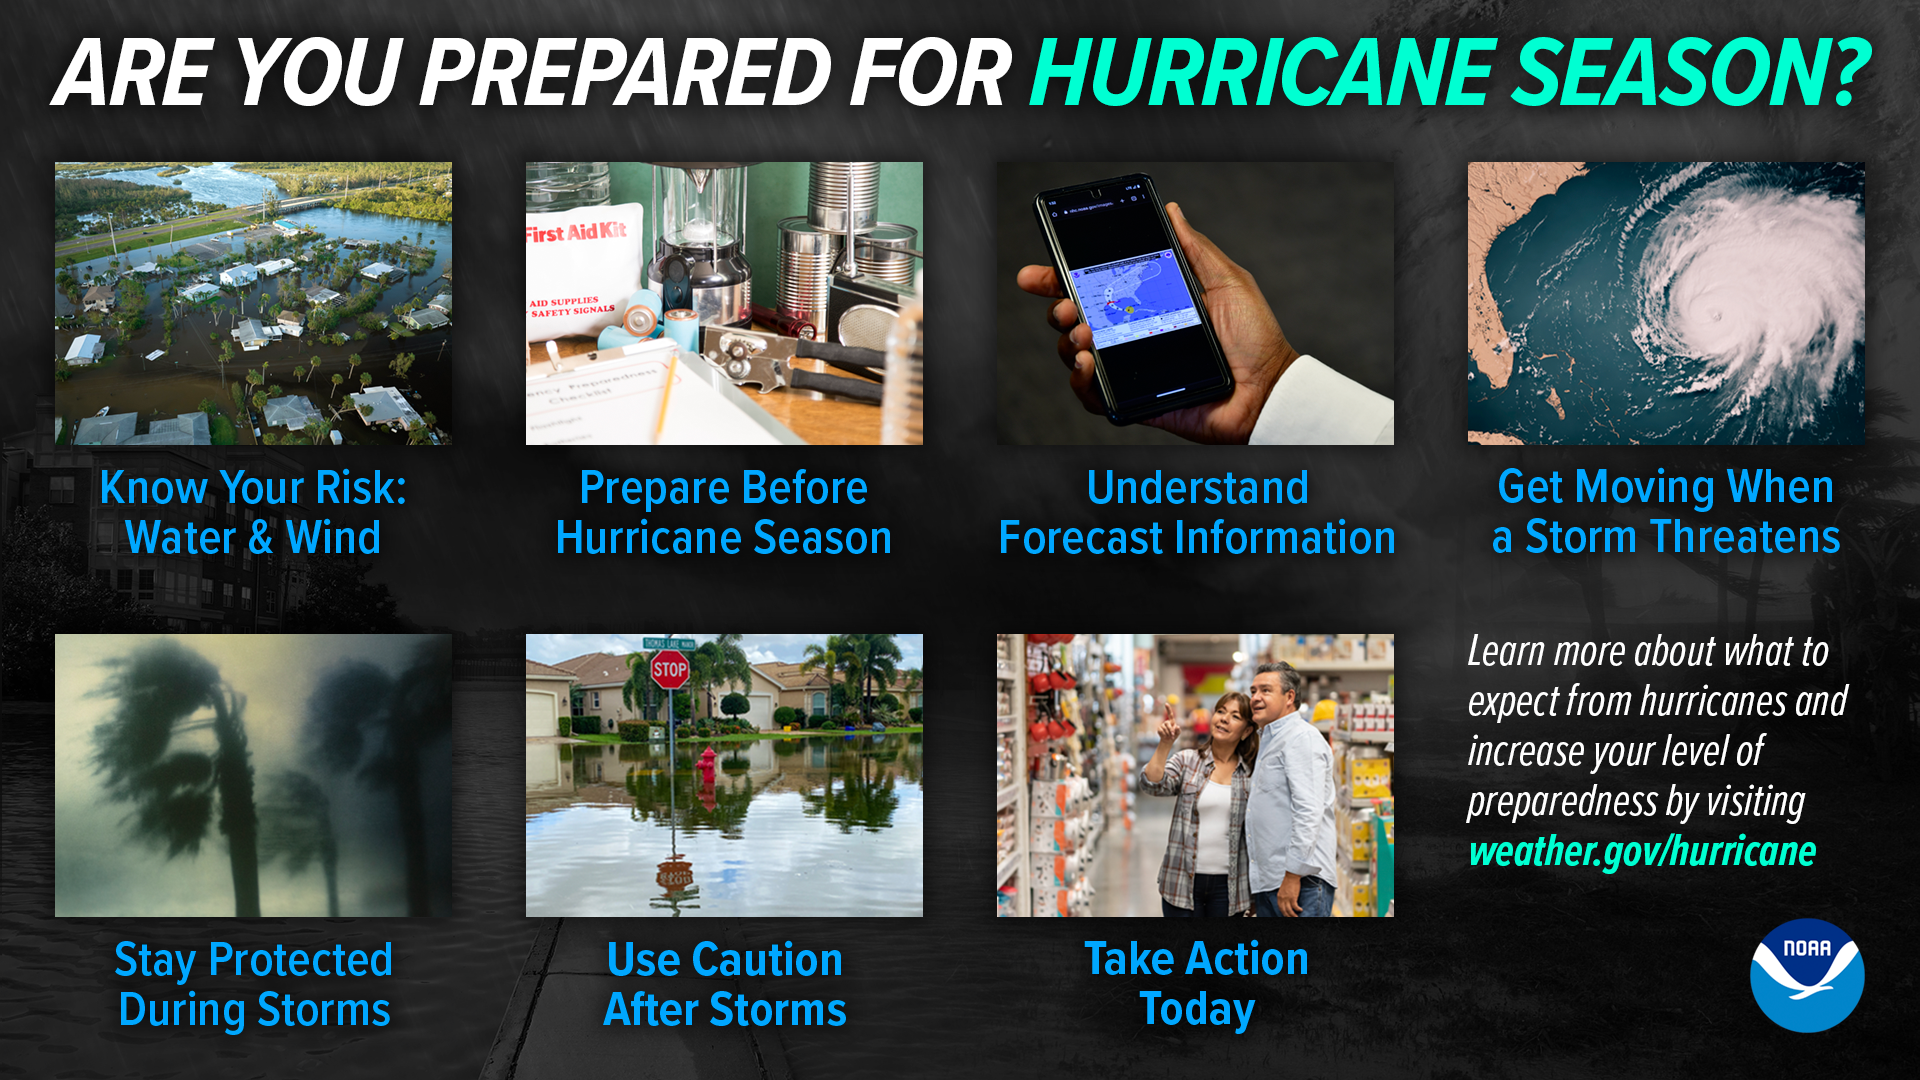 Are you prepared for hurricane season? Know your risk: water & wind. Prepare before hurricane season. Understand forecast information. Get moving when a storm threatens. Stay protected during storms. Use caution after storms. Take action today. Learn more about what to expect from hurricanes and increase your level of preparedness by visiting weather.gov/hurricane.